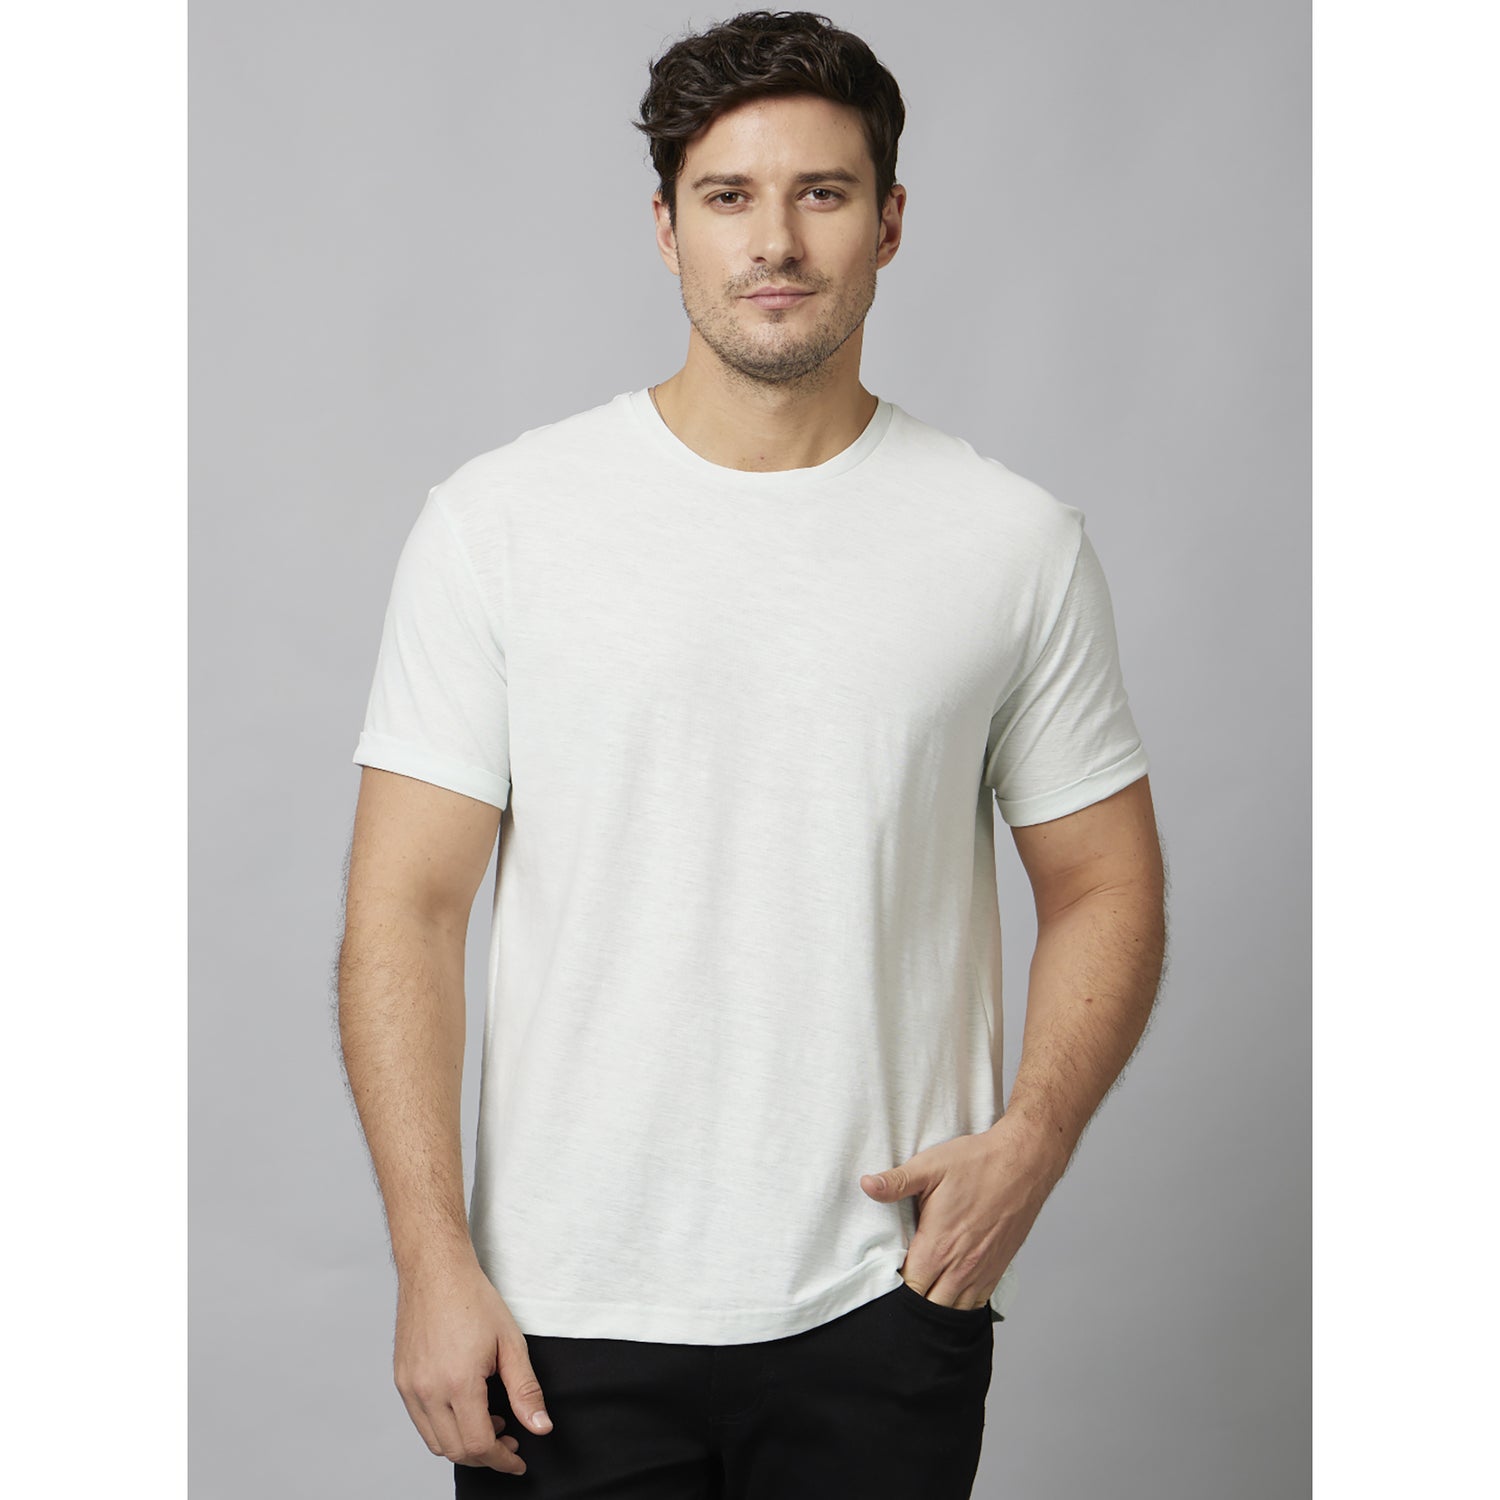 White Solid Half Sleeve Cotton T-Shirts (FECOLA)